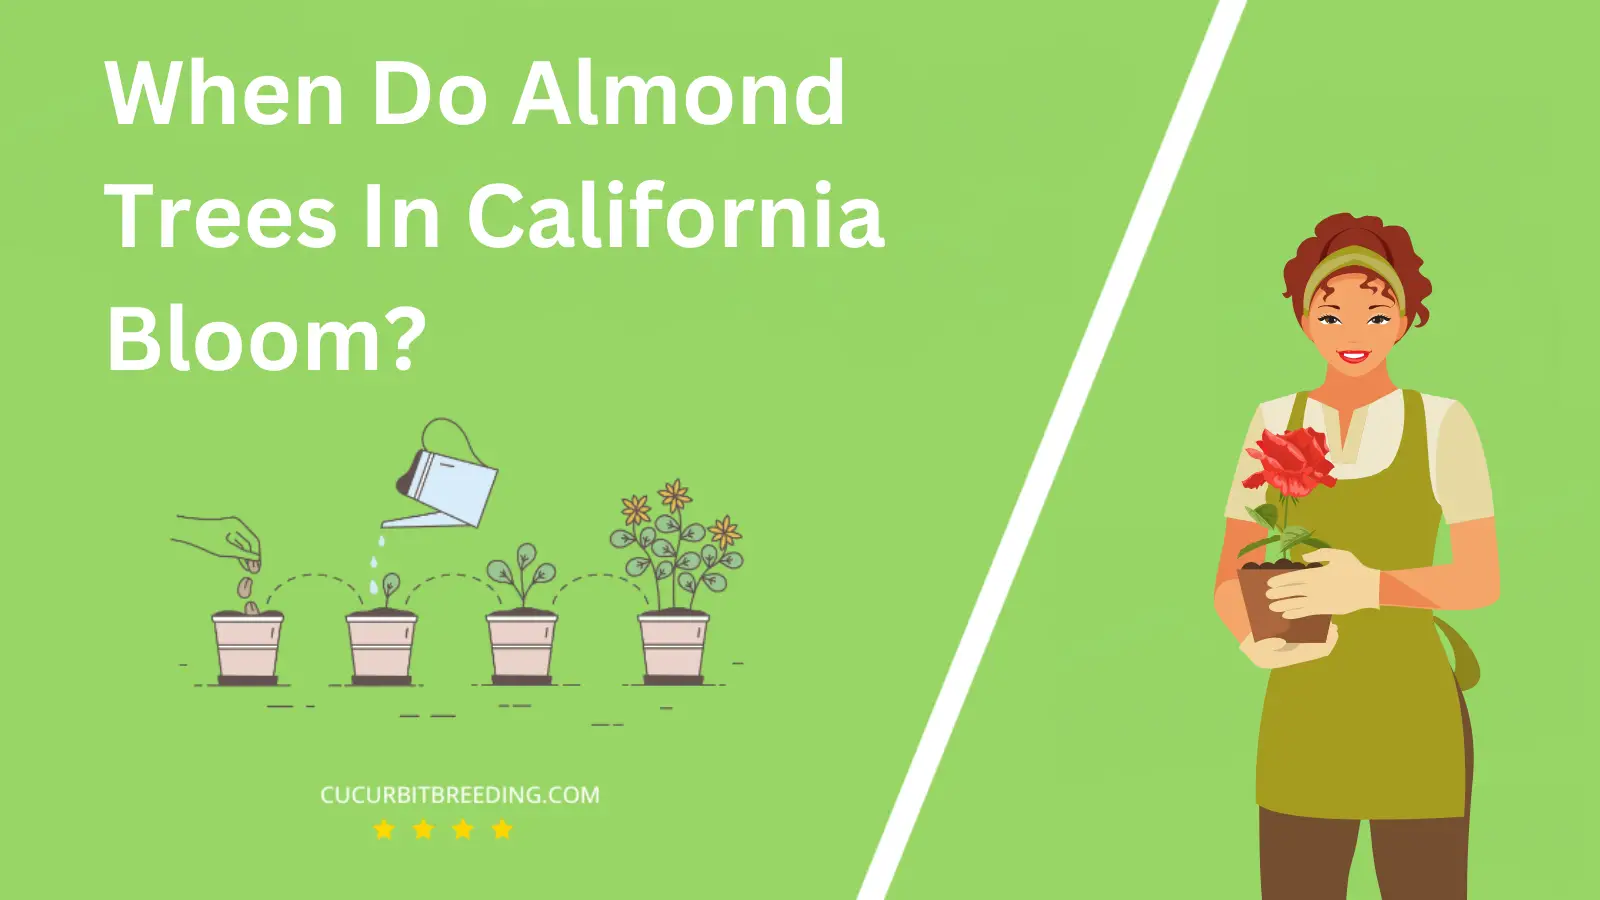 When Do Almond Trees In California Bloom?